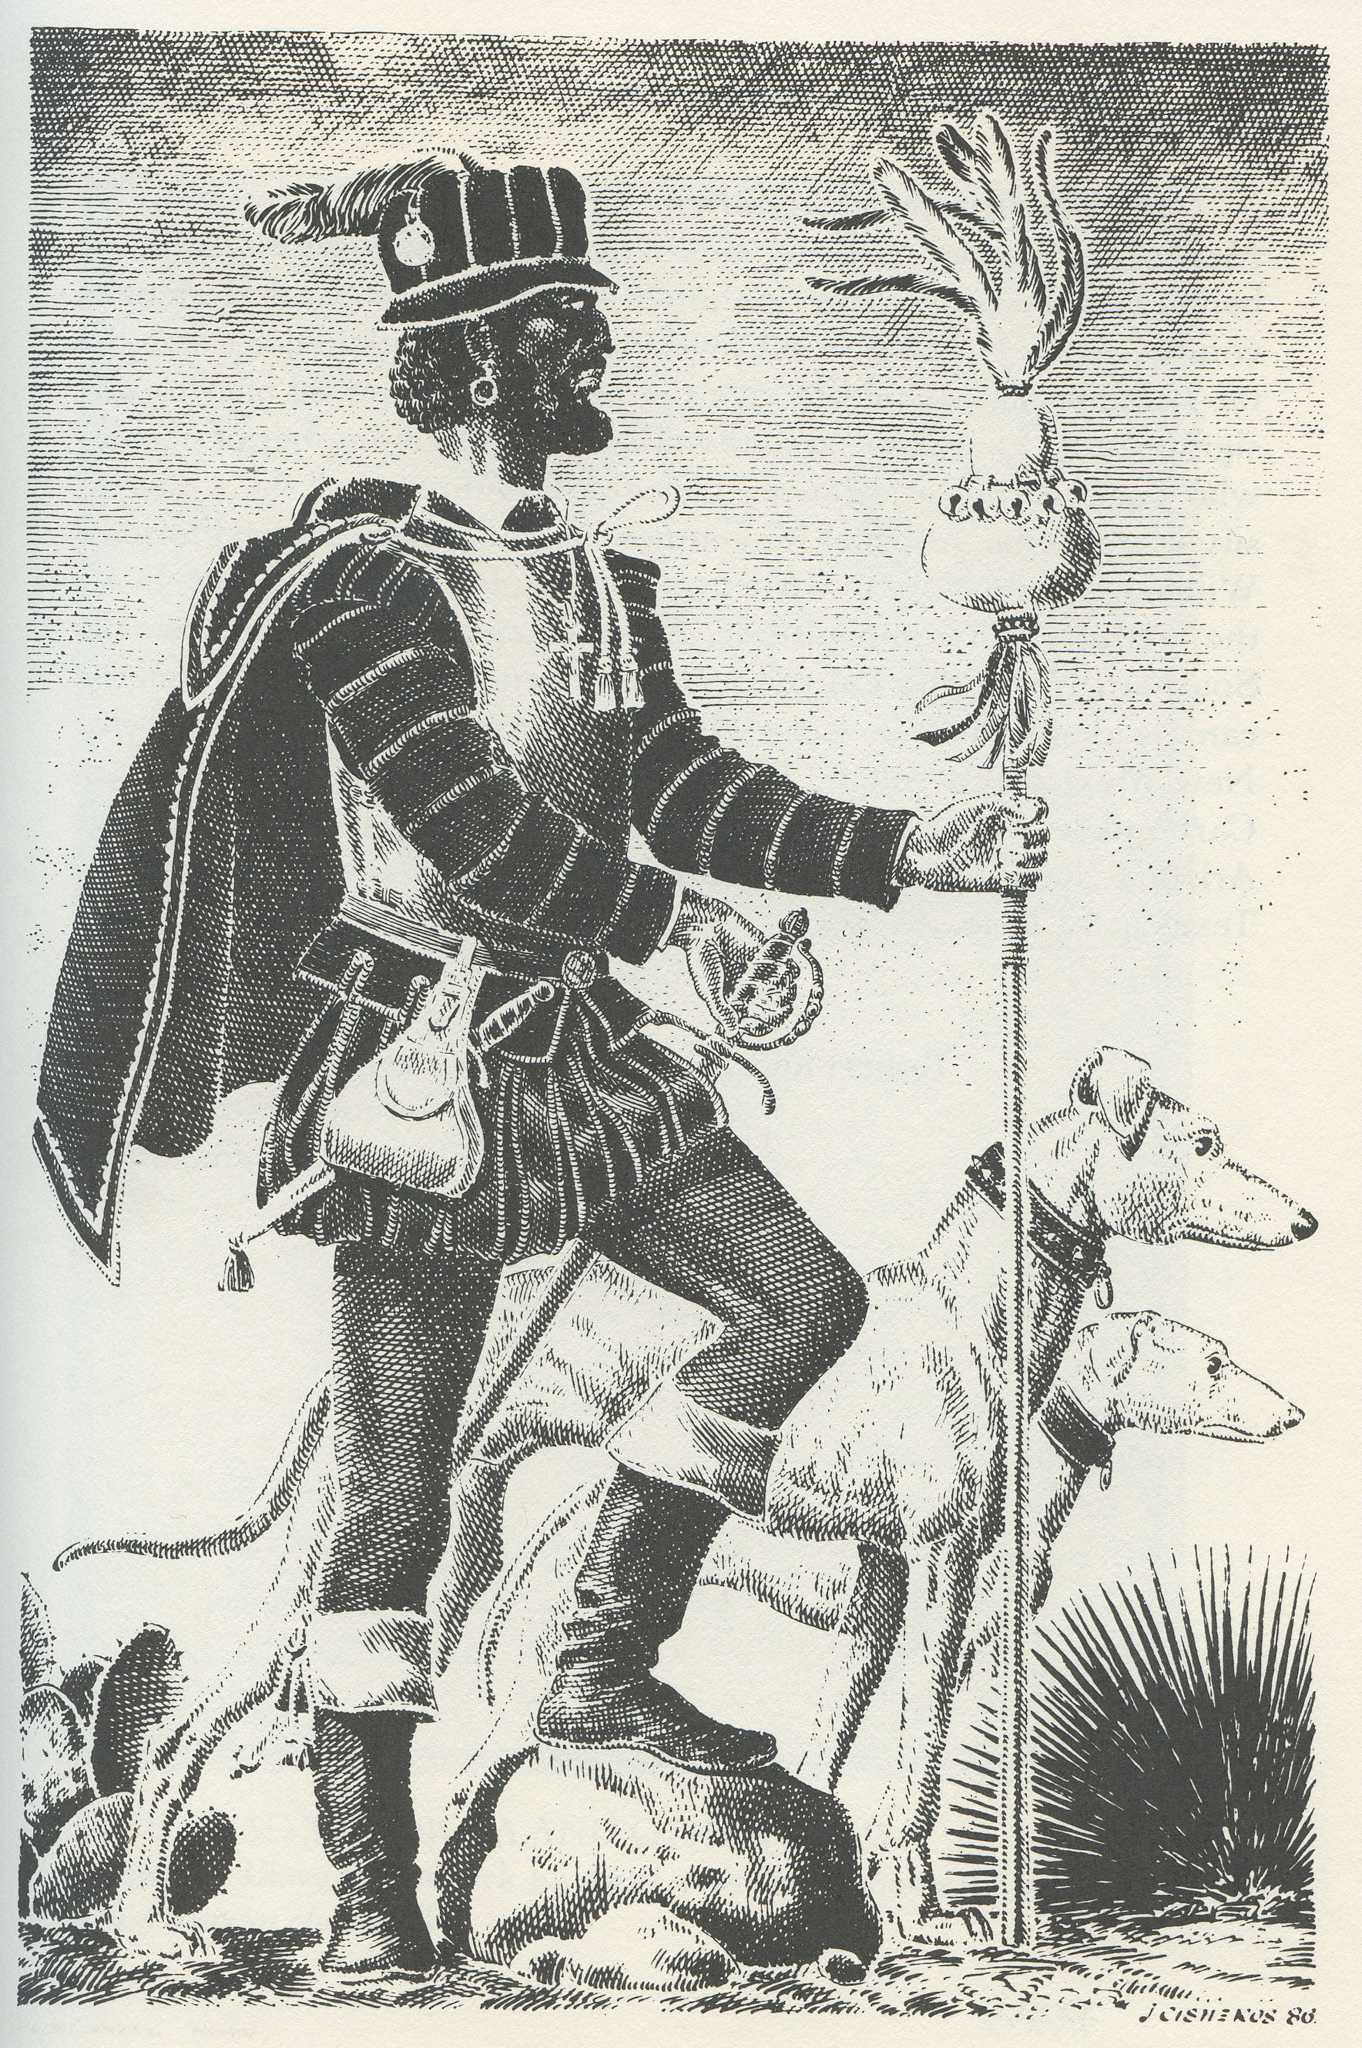 A black and white printed silhouette of Esteban de Dorantes looking out with a sceptre in hand.